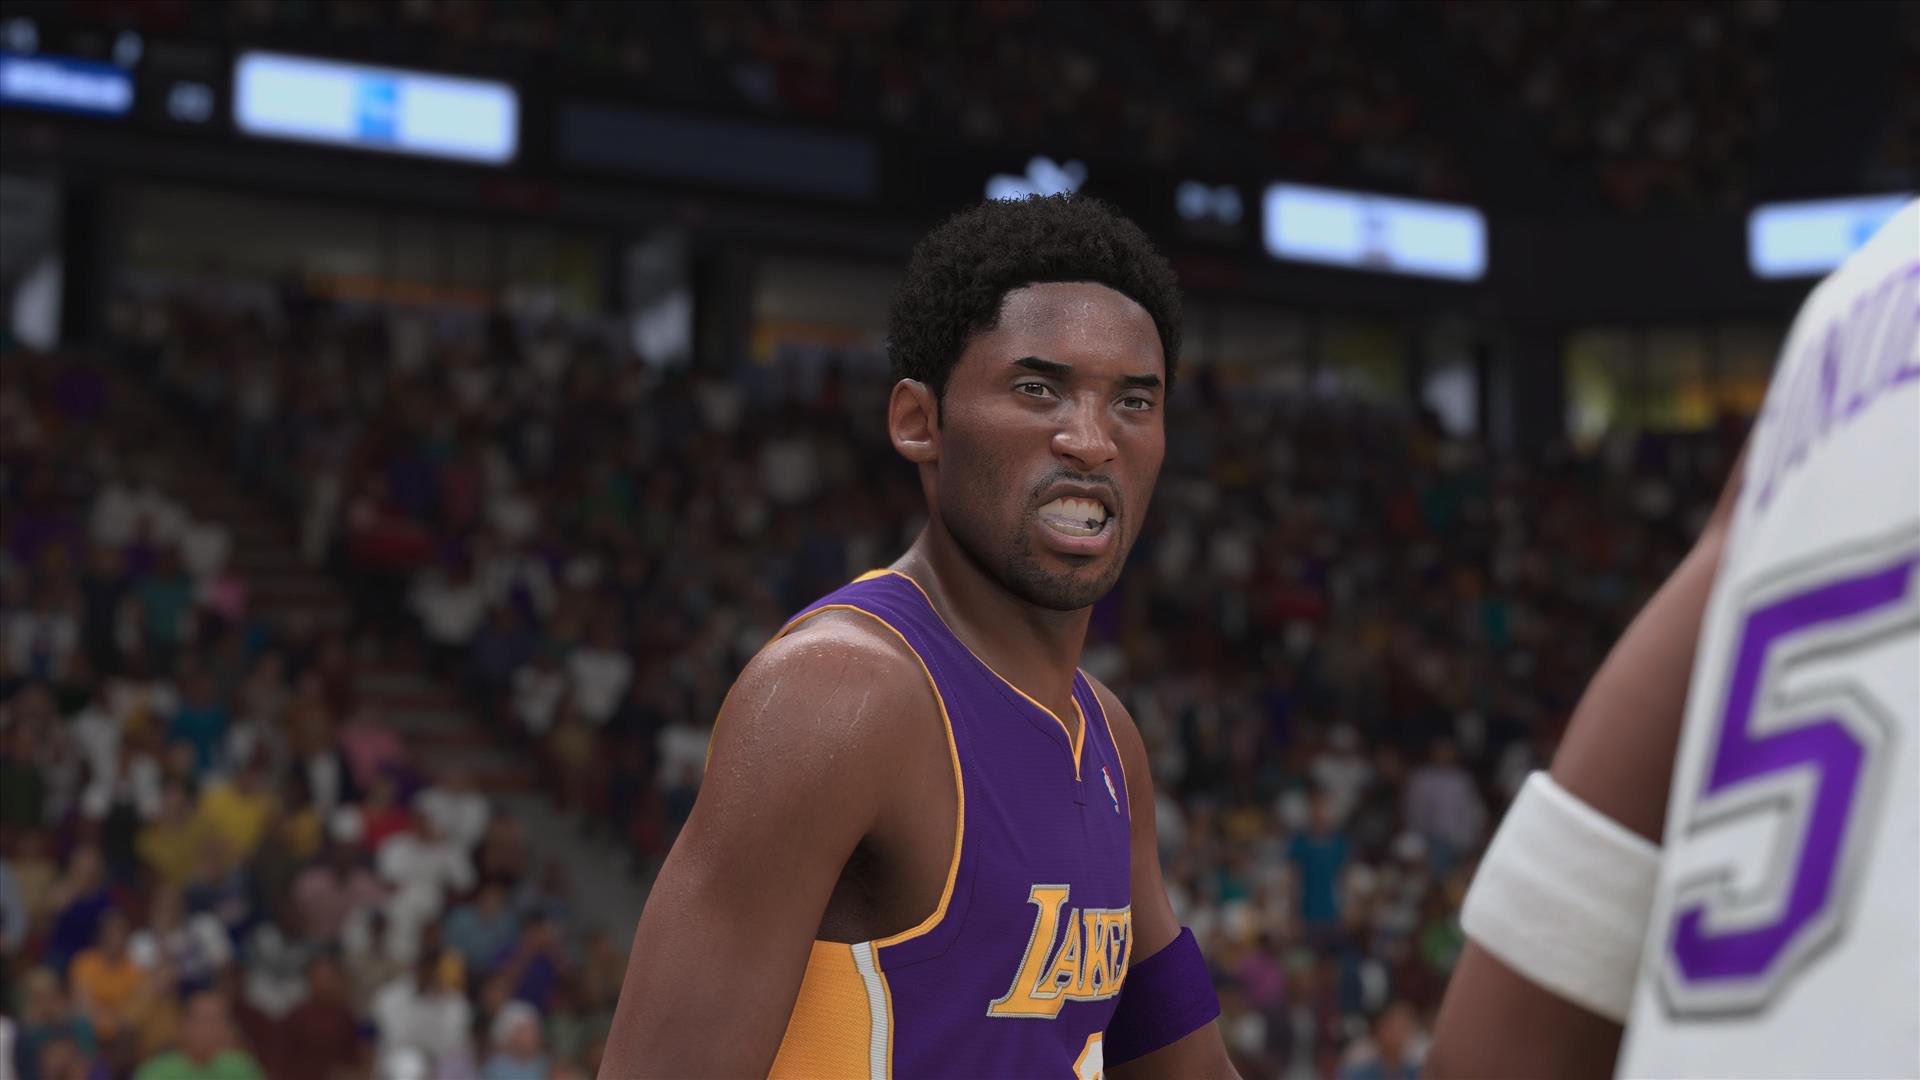 2K sticking to the gold outfits. They had them in NBA 2K20 as well